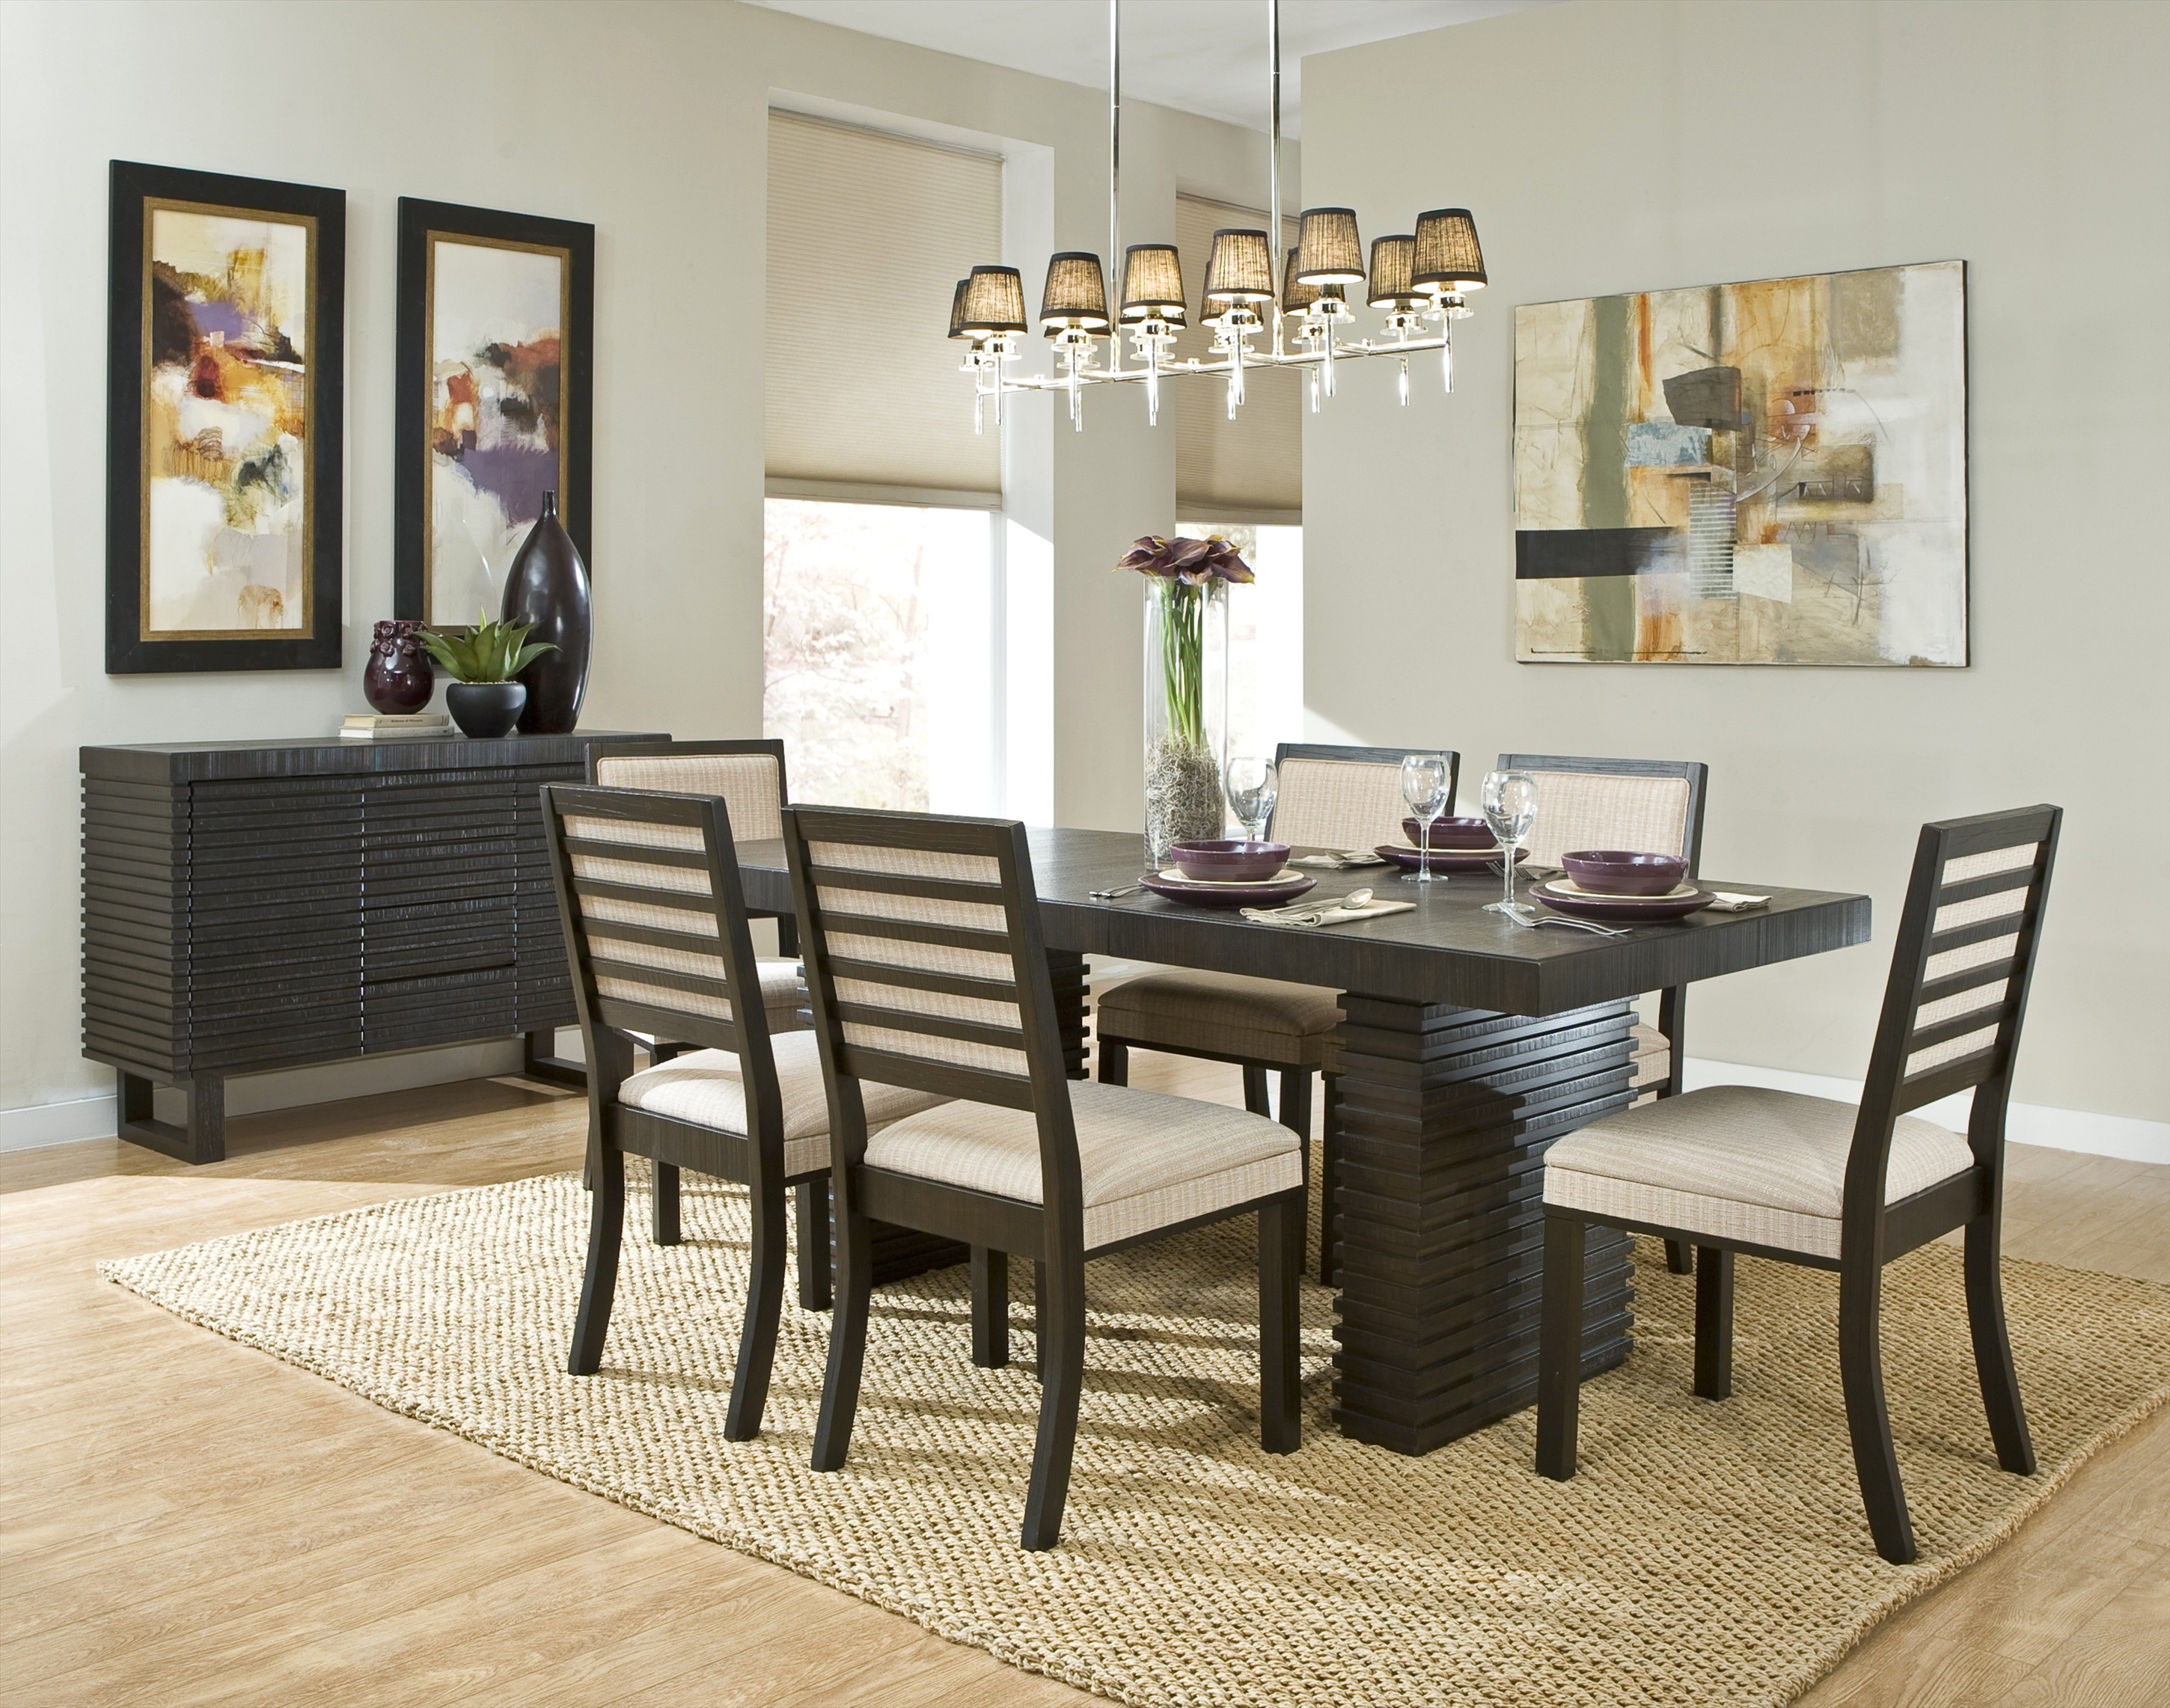 modern chandeliers dining room photo - 1